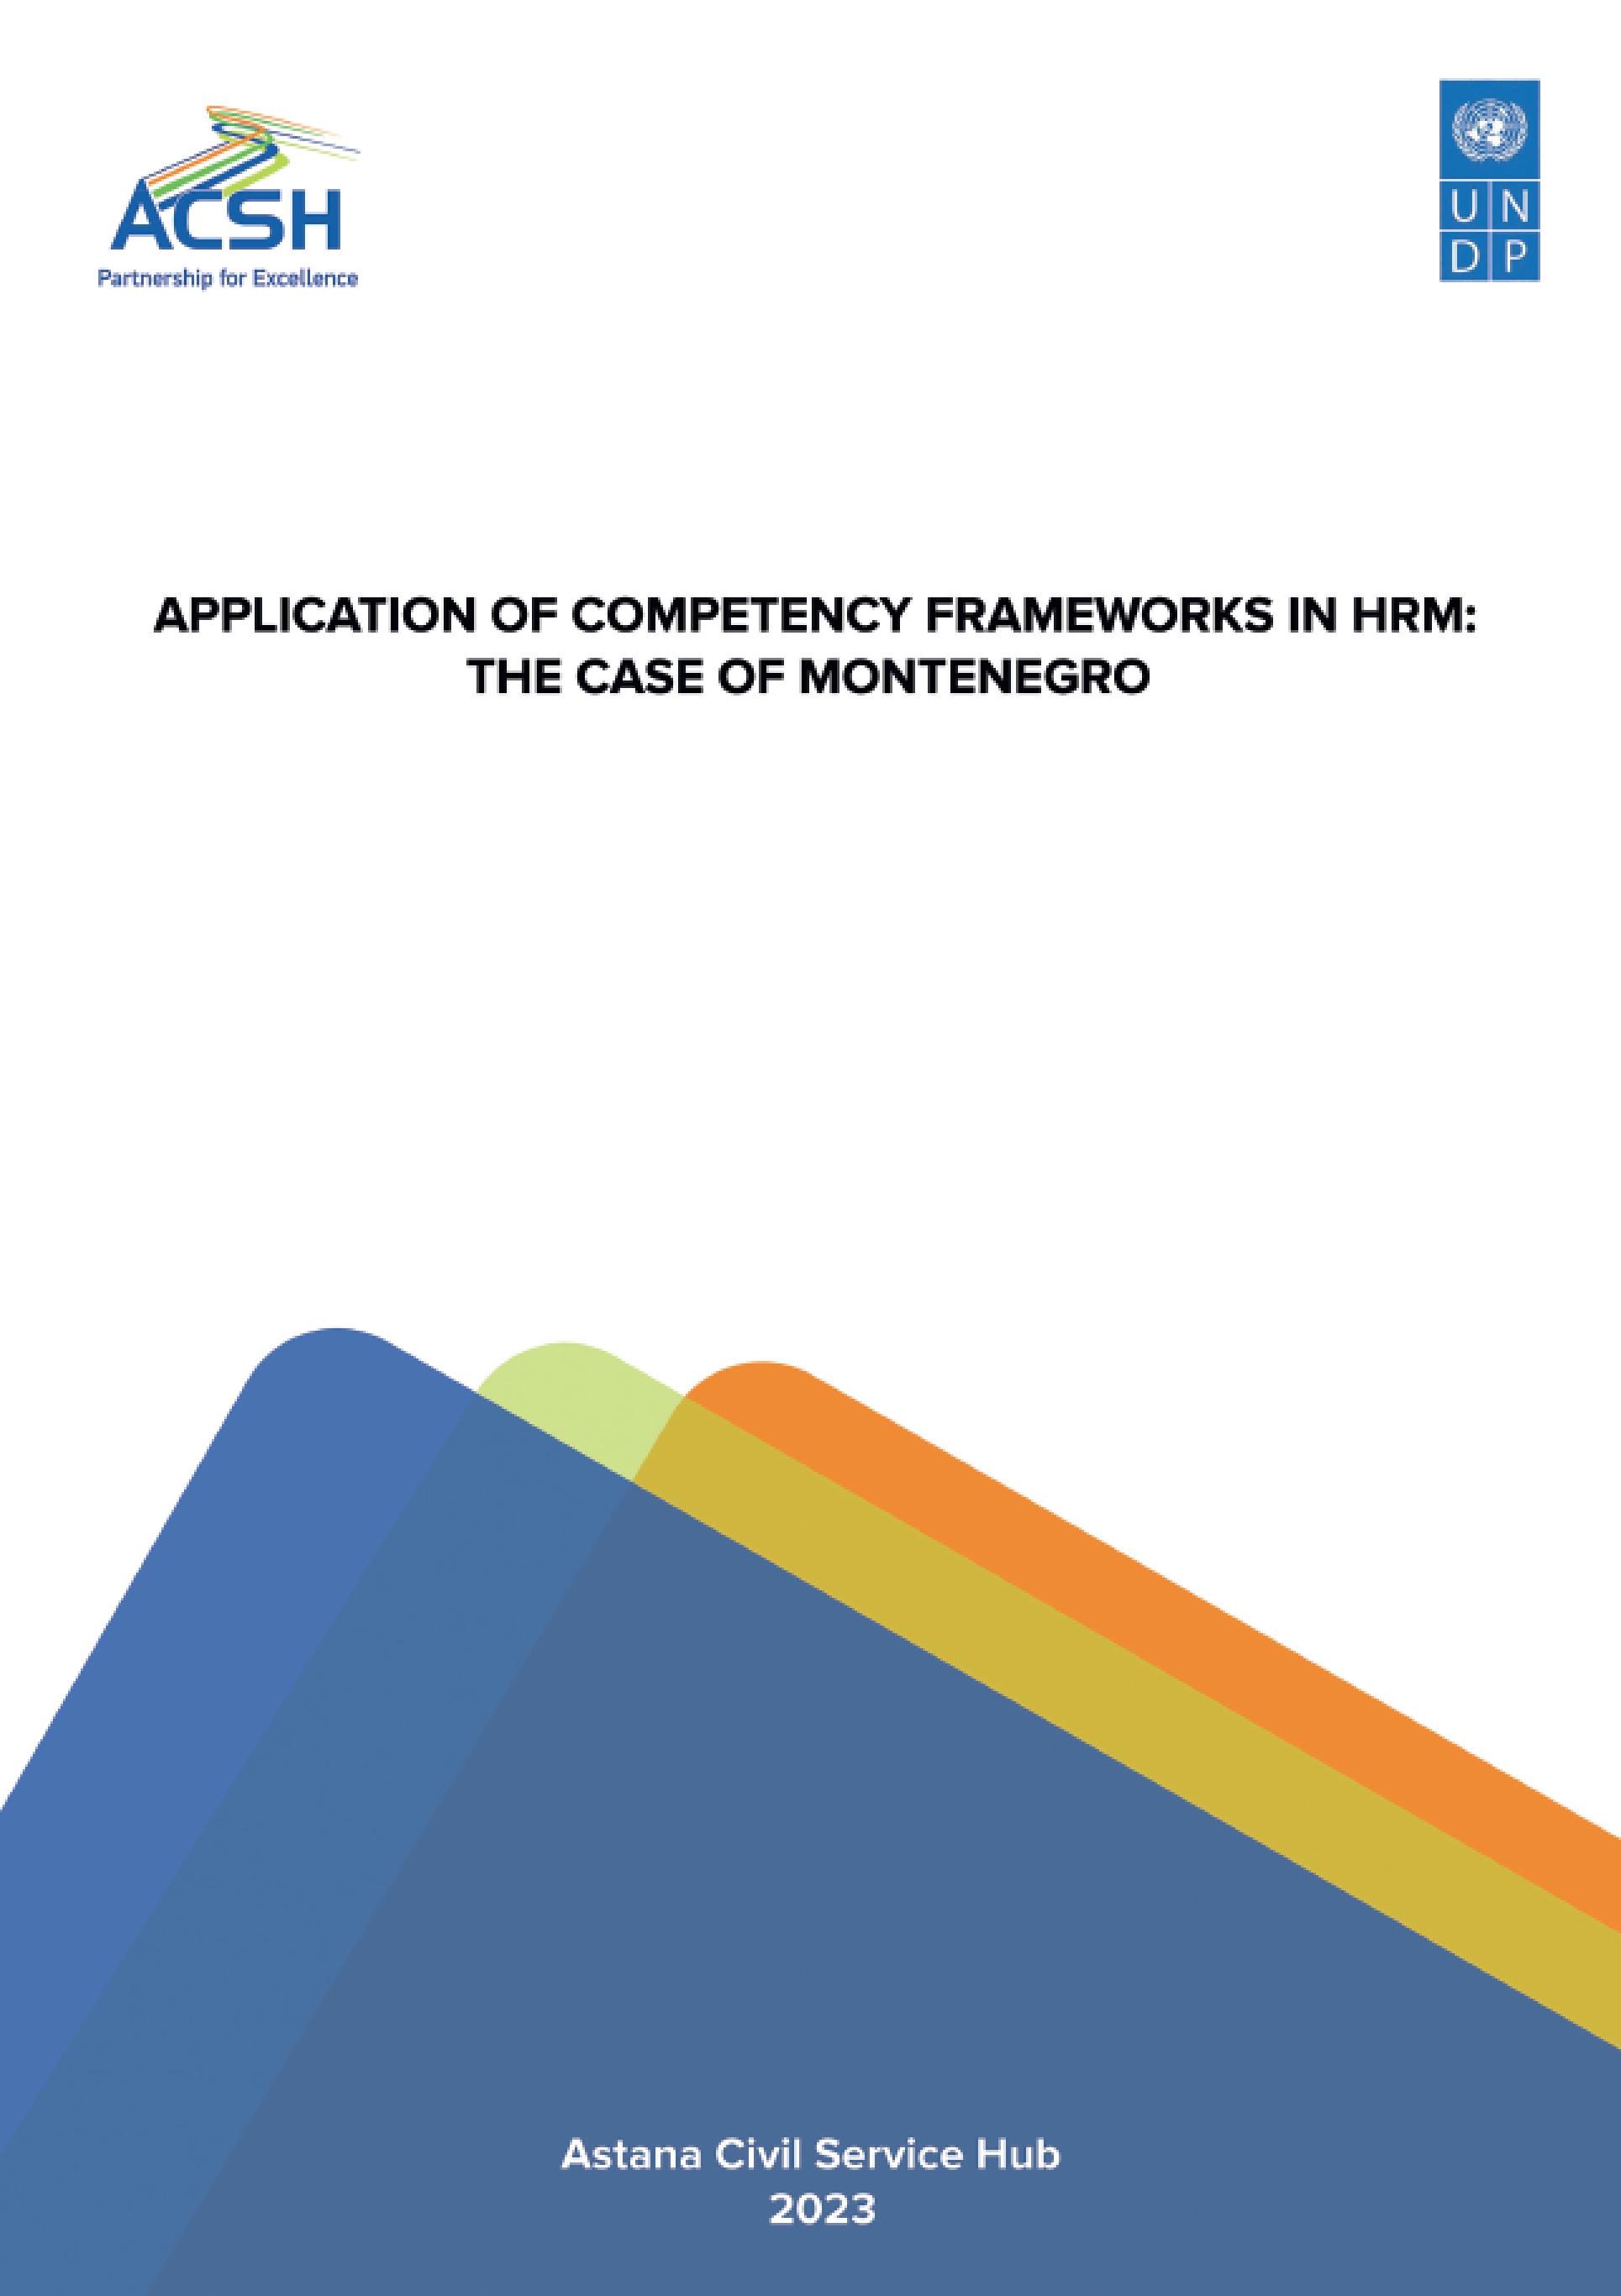 Application of Competency Frameworks in HRM: the Case of Montenegro